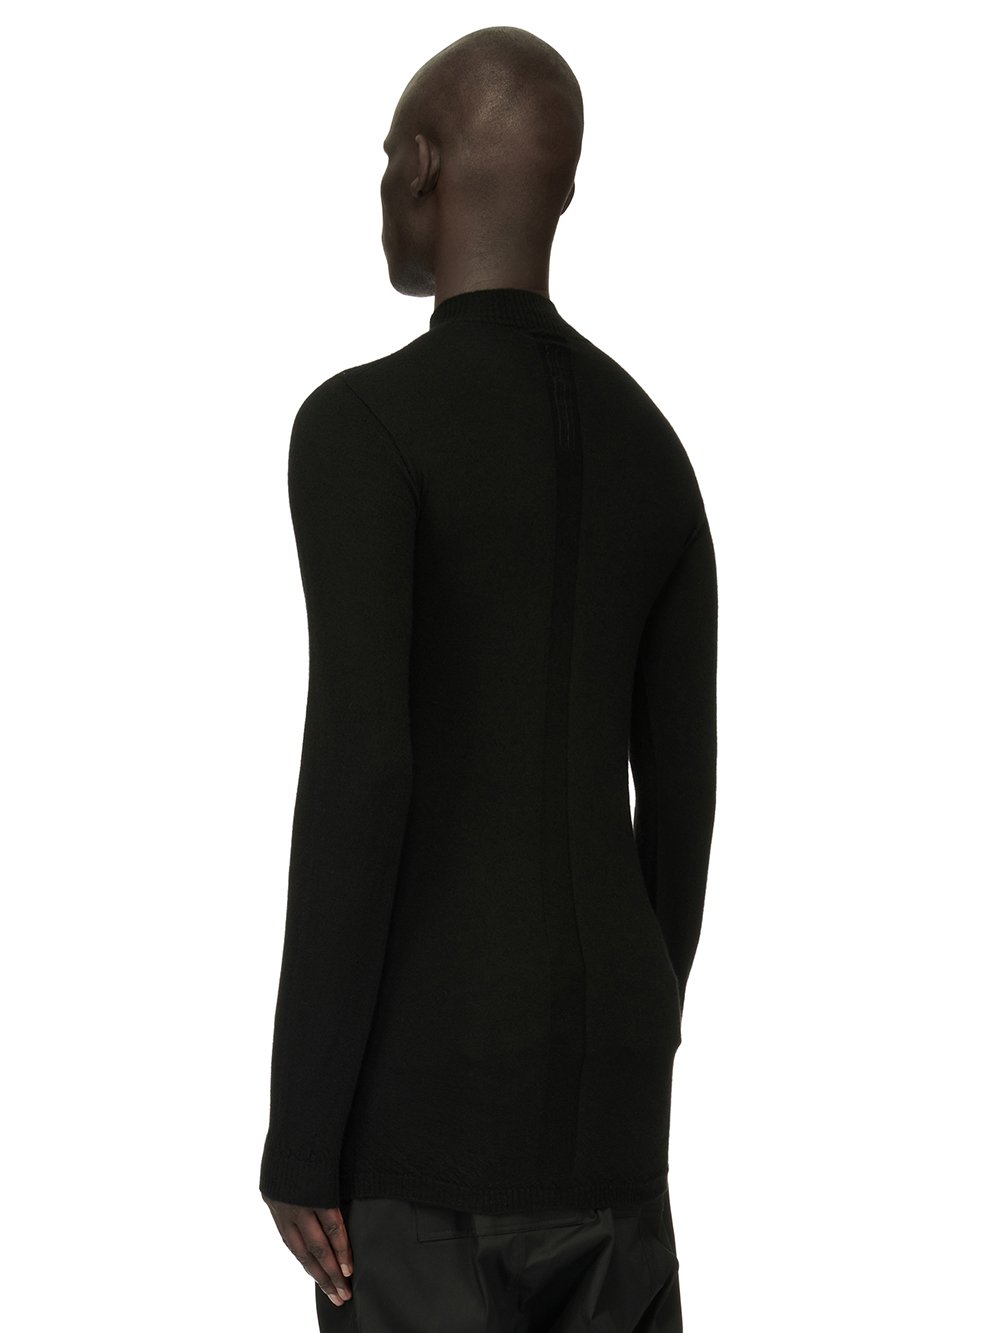 RICK OWENS FOREVER LEVEL LUPETTO SWEATER IN BLACK LIGHTWEIGHT RASATO KNIT